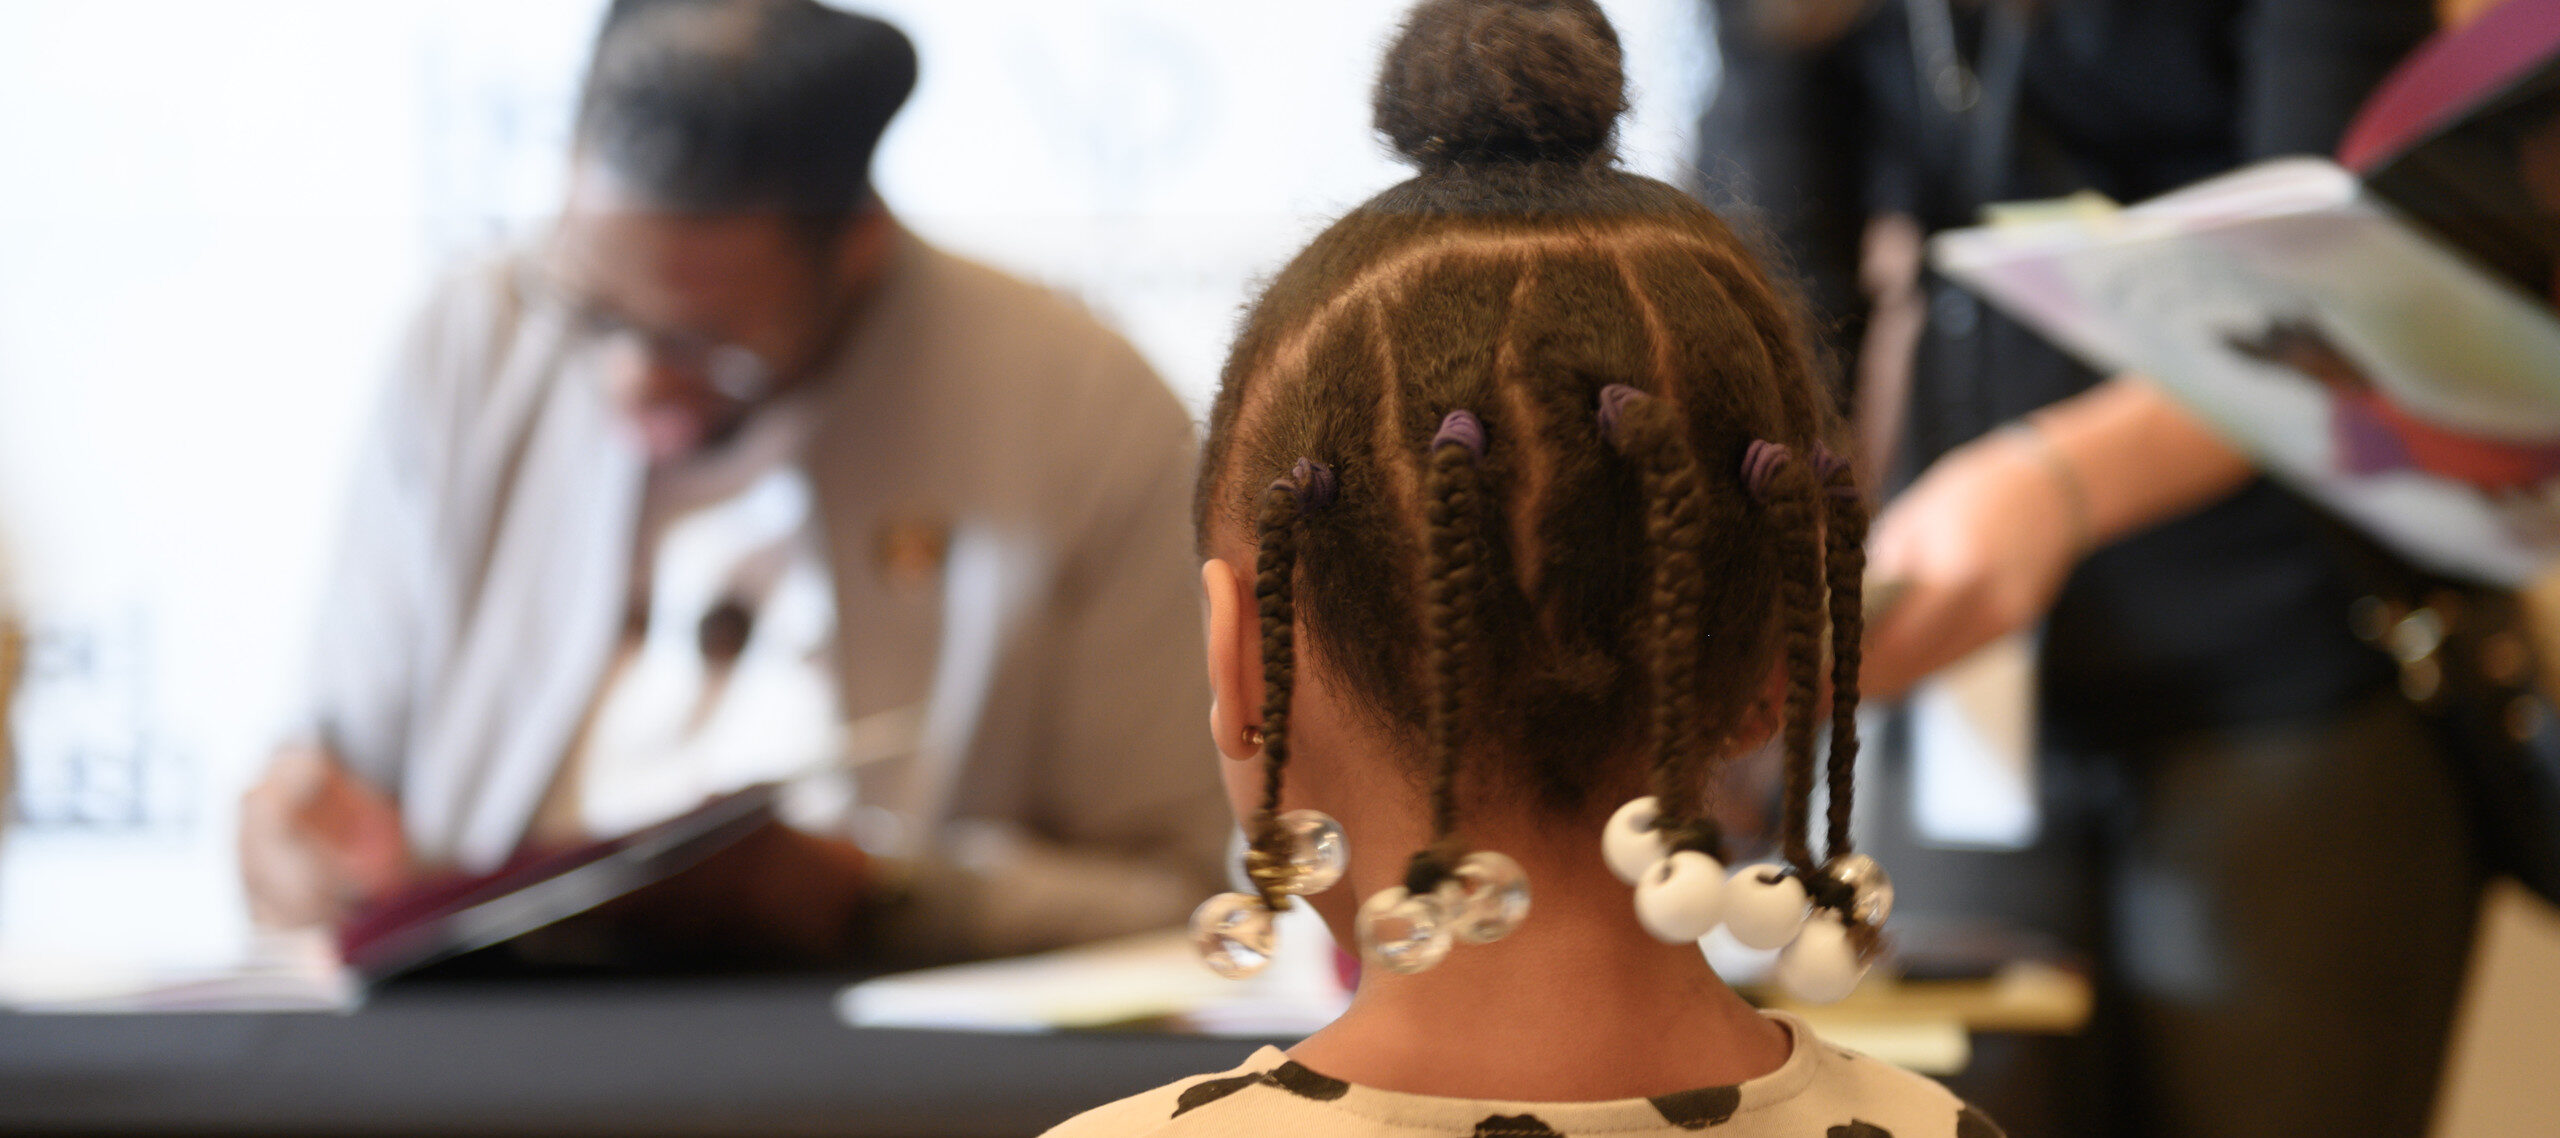 Back of a young girl's head with five braids and a bun on top. She wears a white shirt with black polka dots and is standing waiting for a book signing.